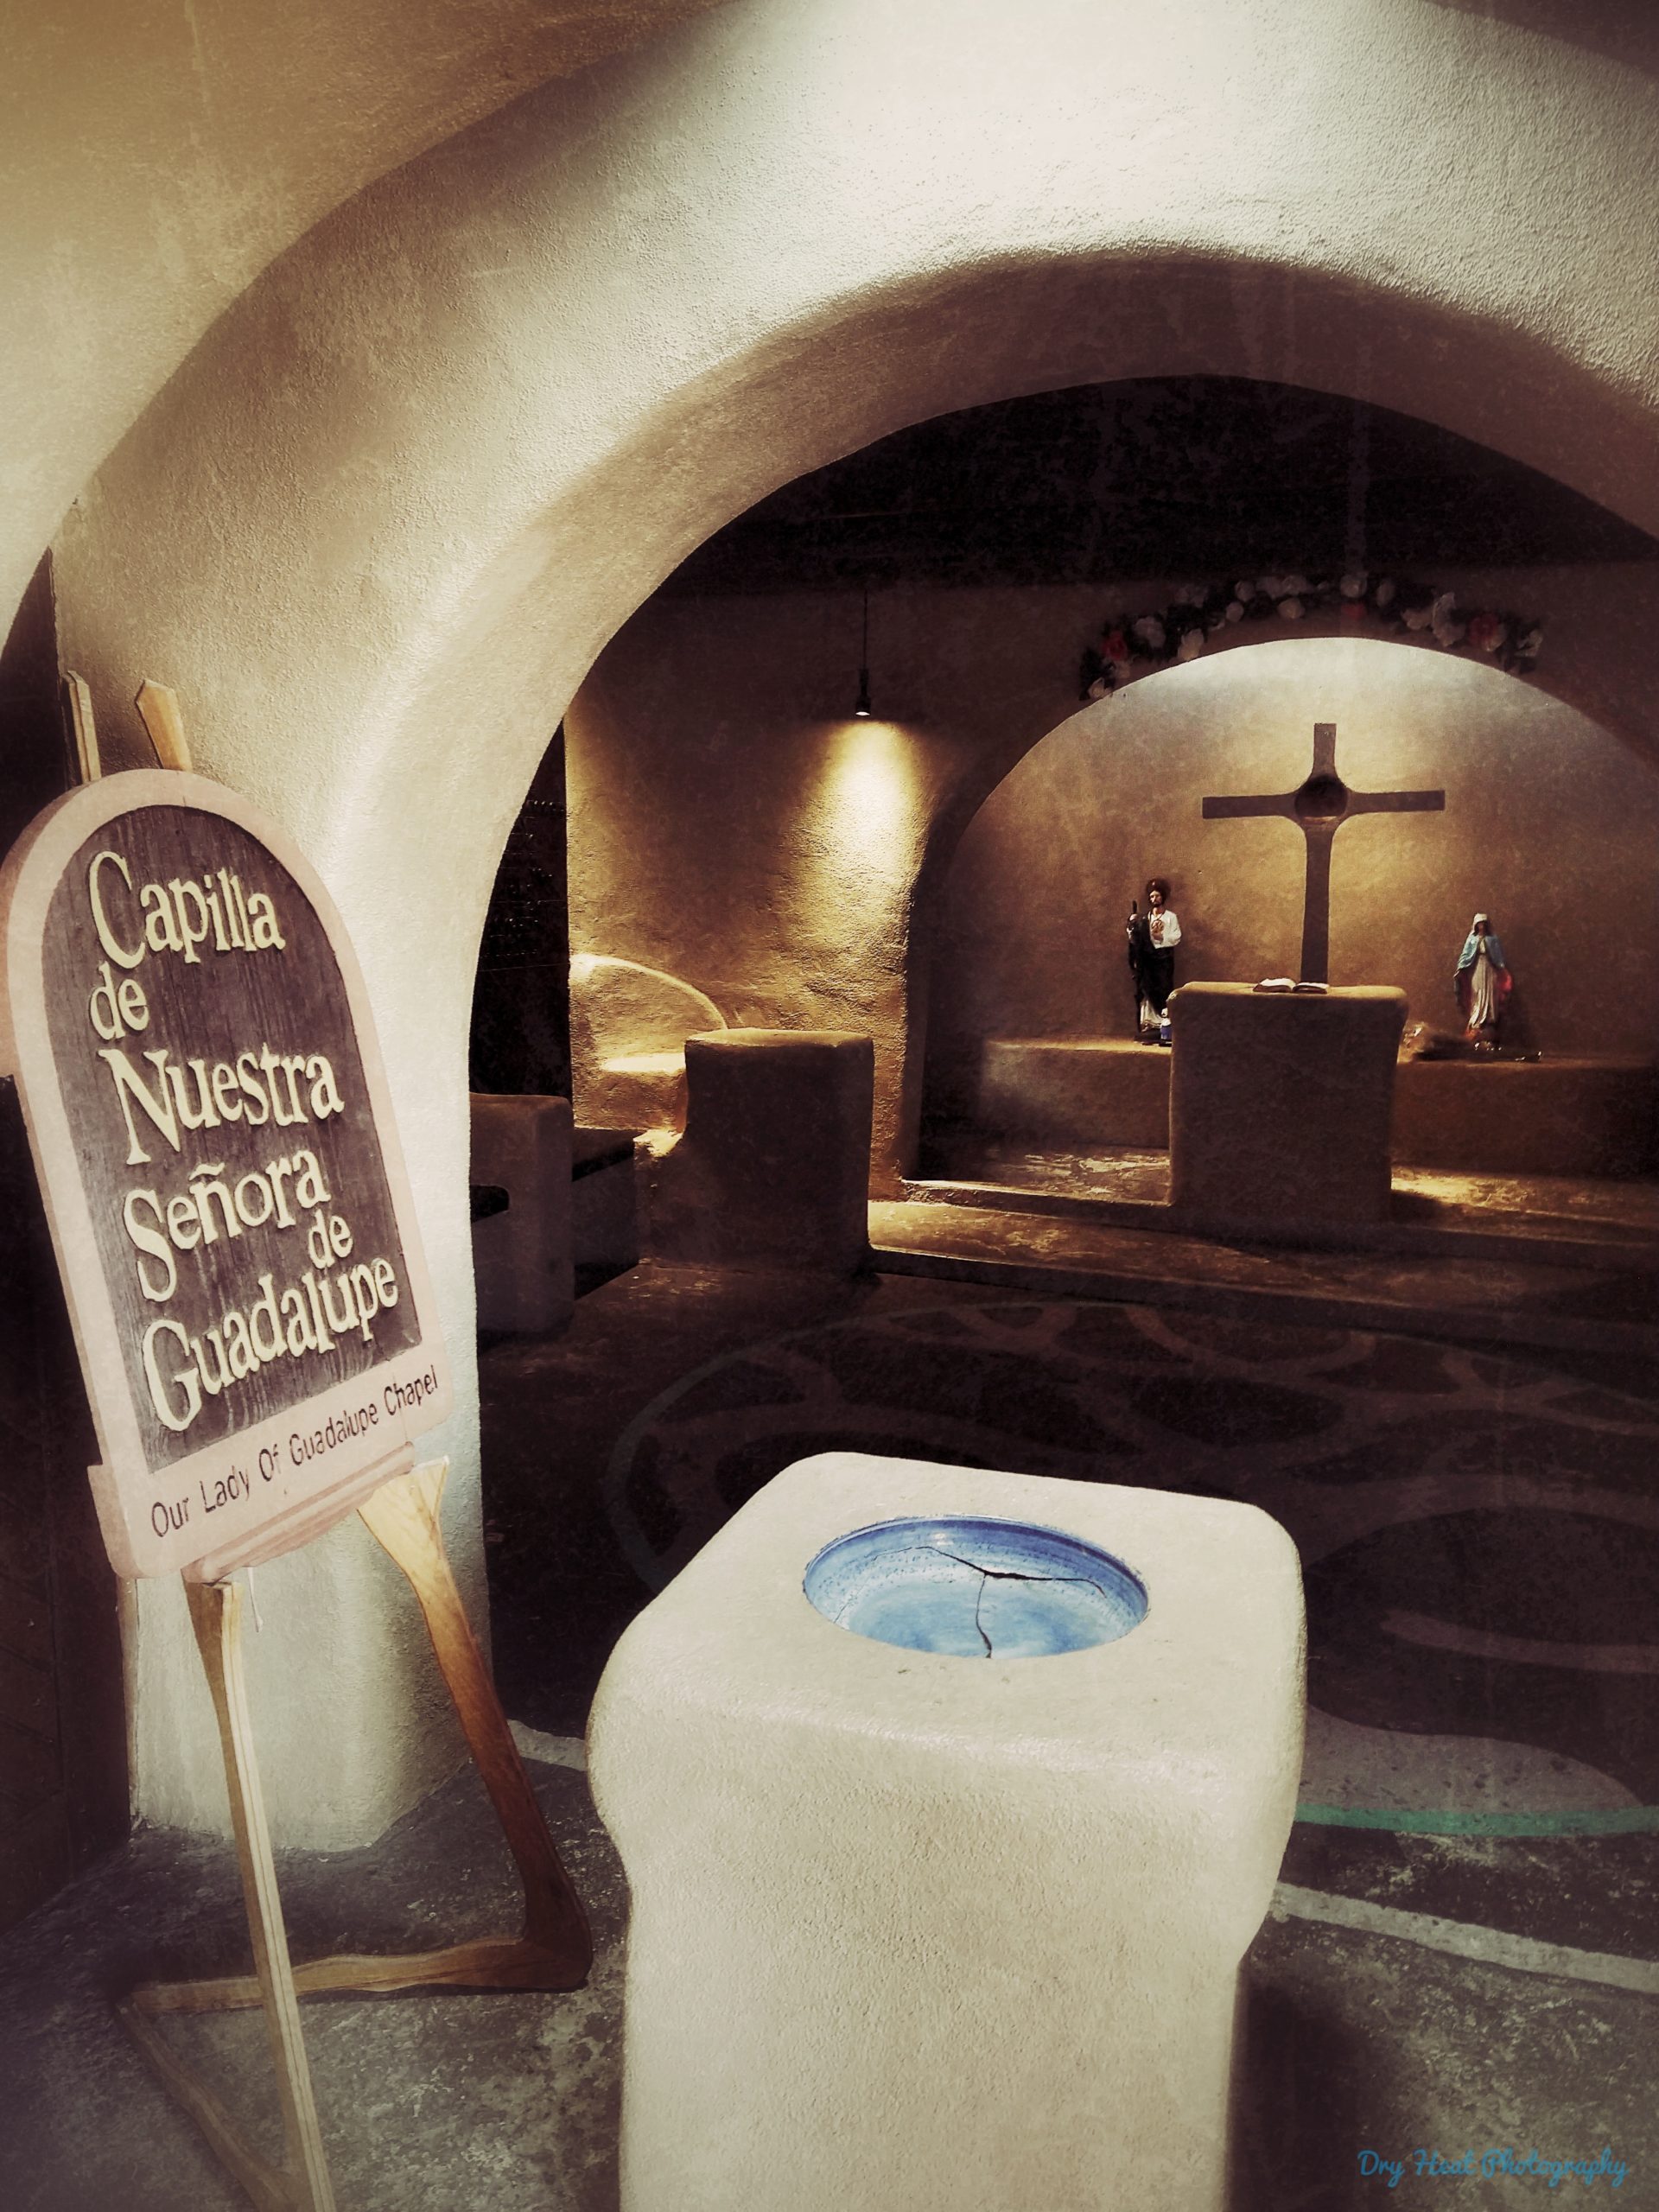 The Guadalupe Chapel in Old Town Albuquerque is a featured location on the Old Town Ghost Tour.